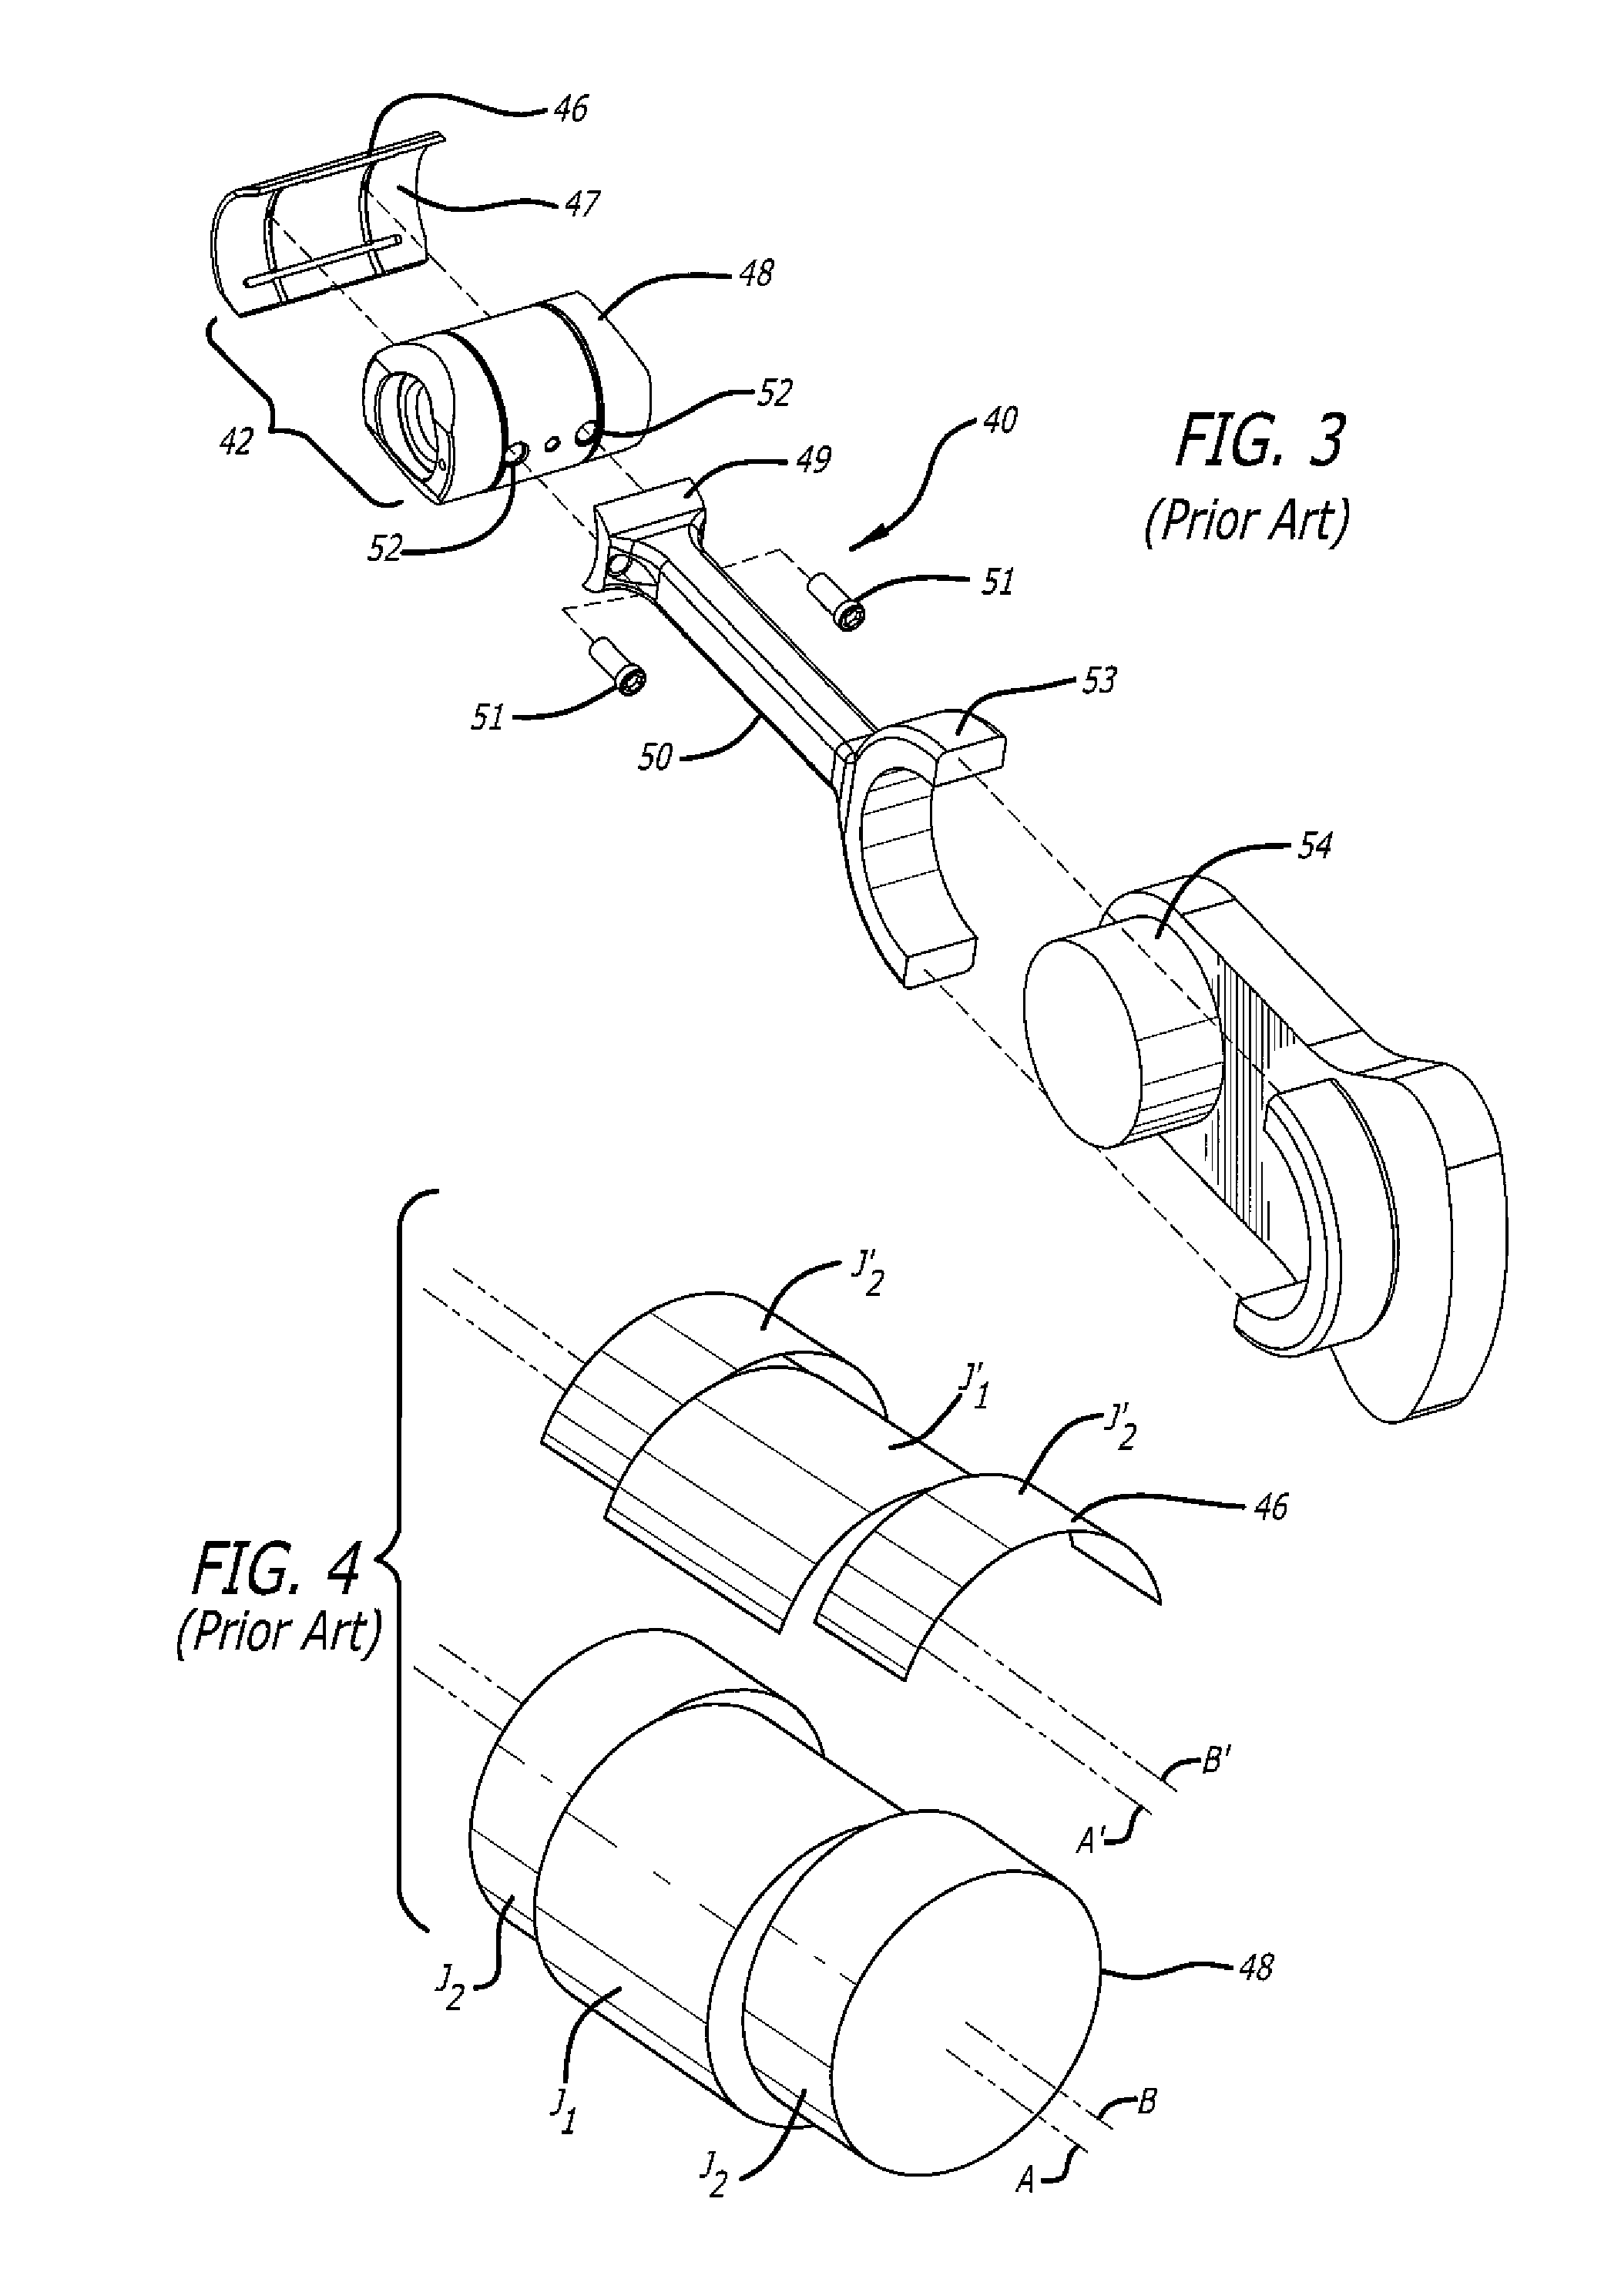 Load Transfer Point Offset Of Rocking Journal Wristpins In Uniflow-Scavenged, Opposed-Piston Engines With Phased Crankshafts